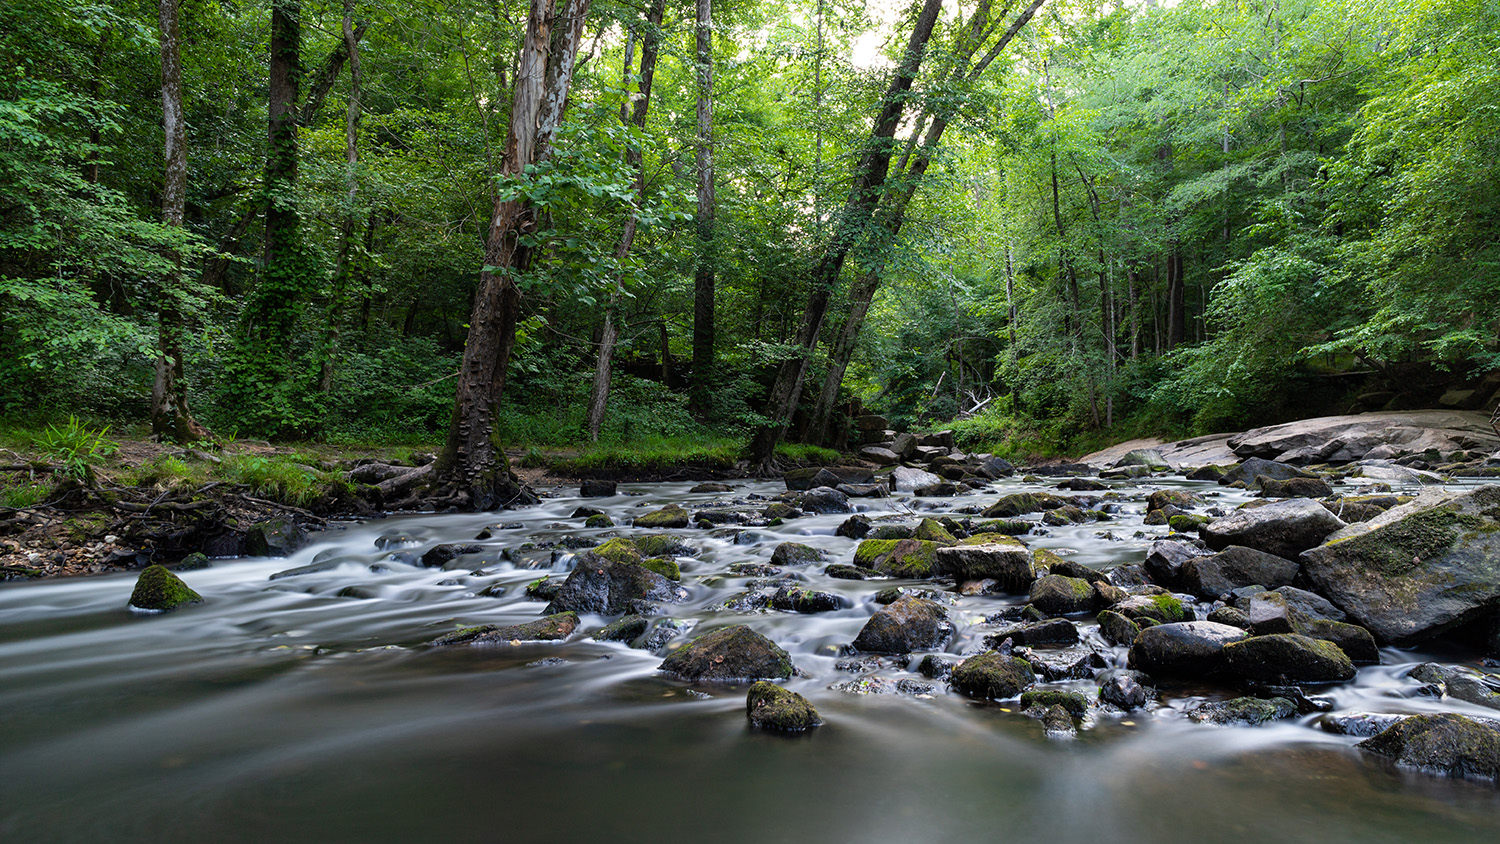 Long exposure photograph of a flowing stream in Umstead State Park in Raleigh, North Carolina.